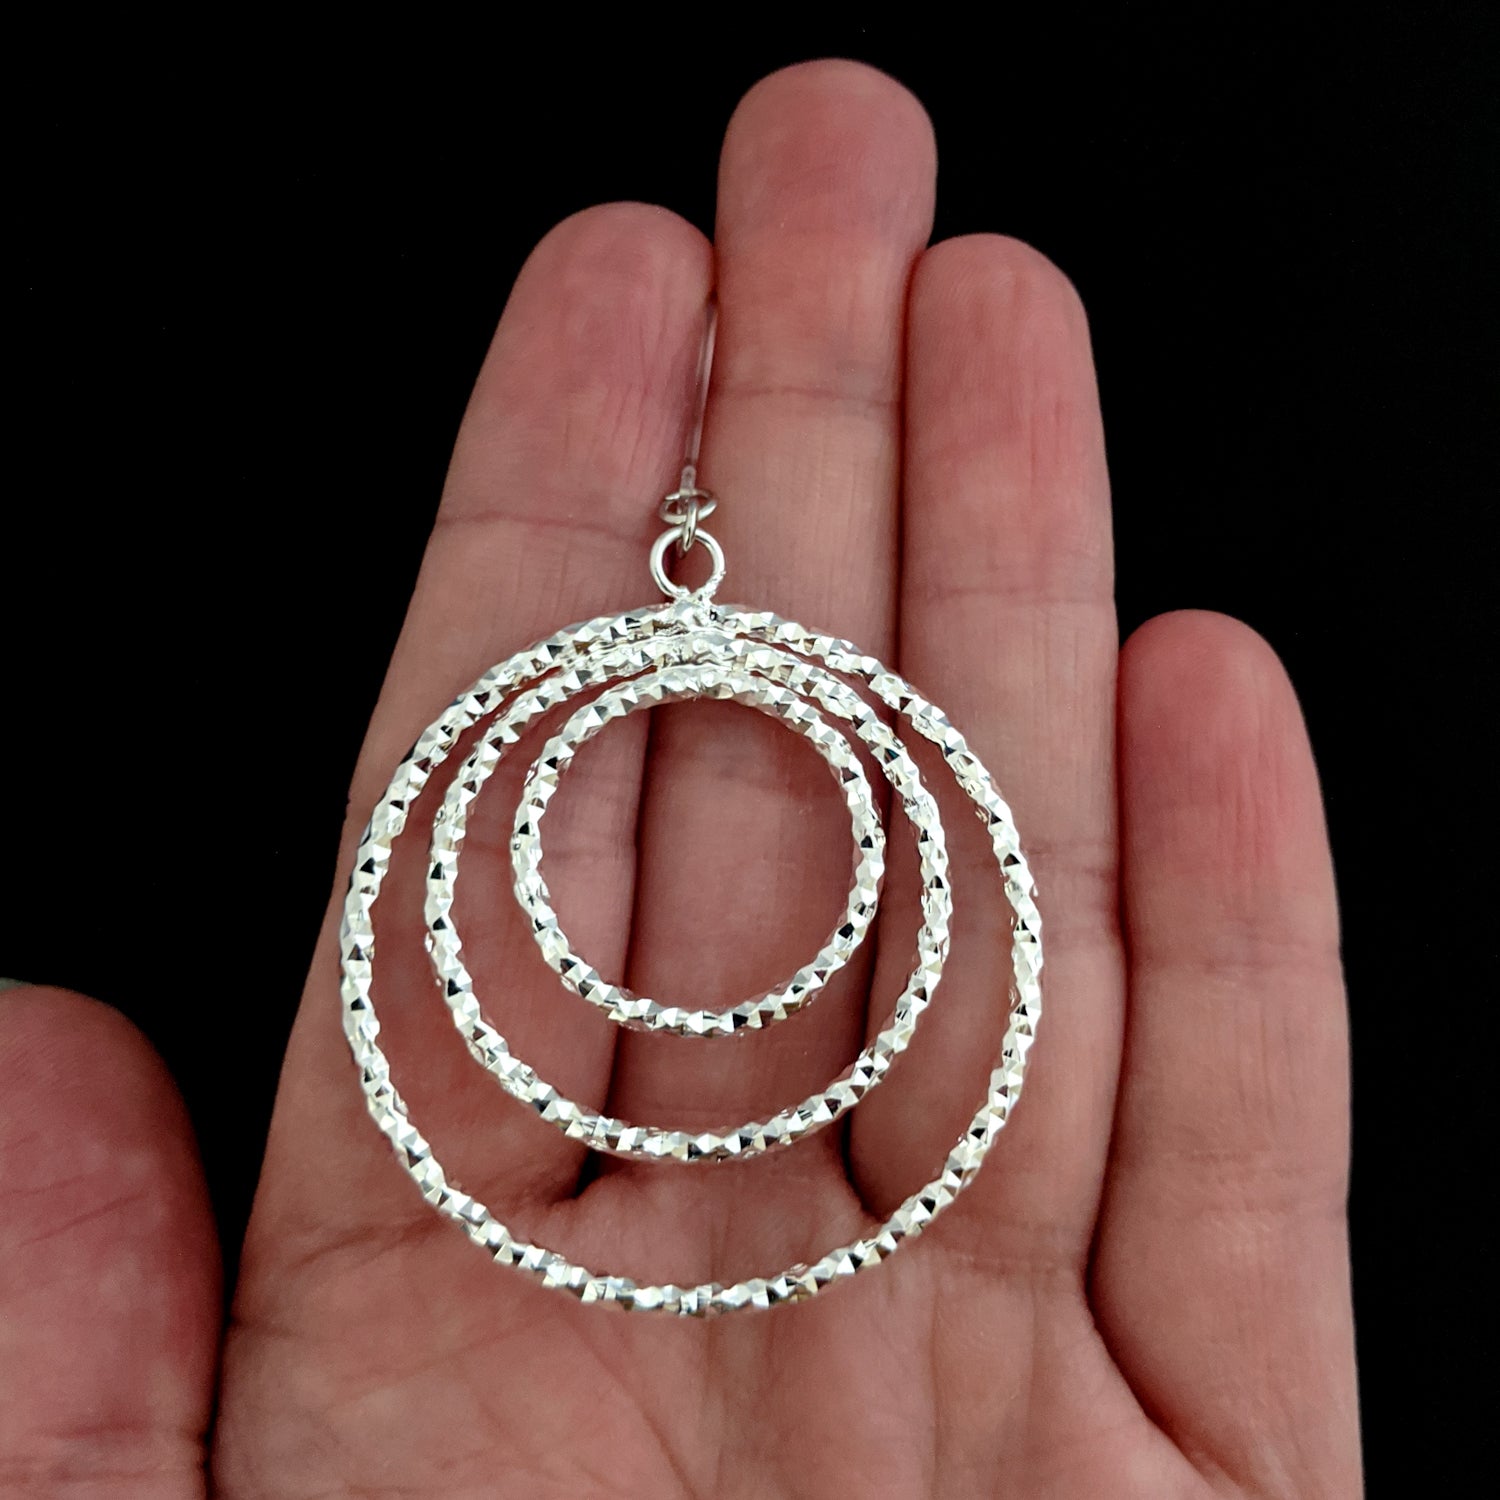 Silver Stacked Hoop Earrings (Dangles) - size comparison hand